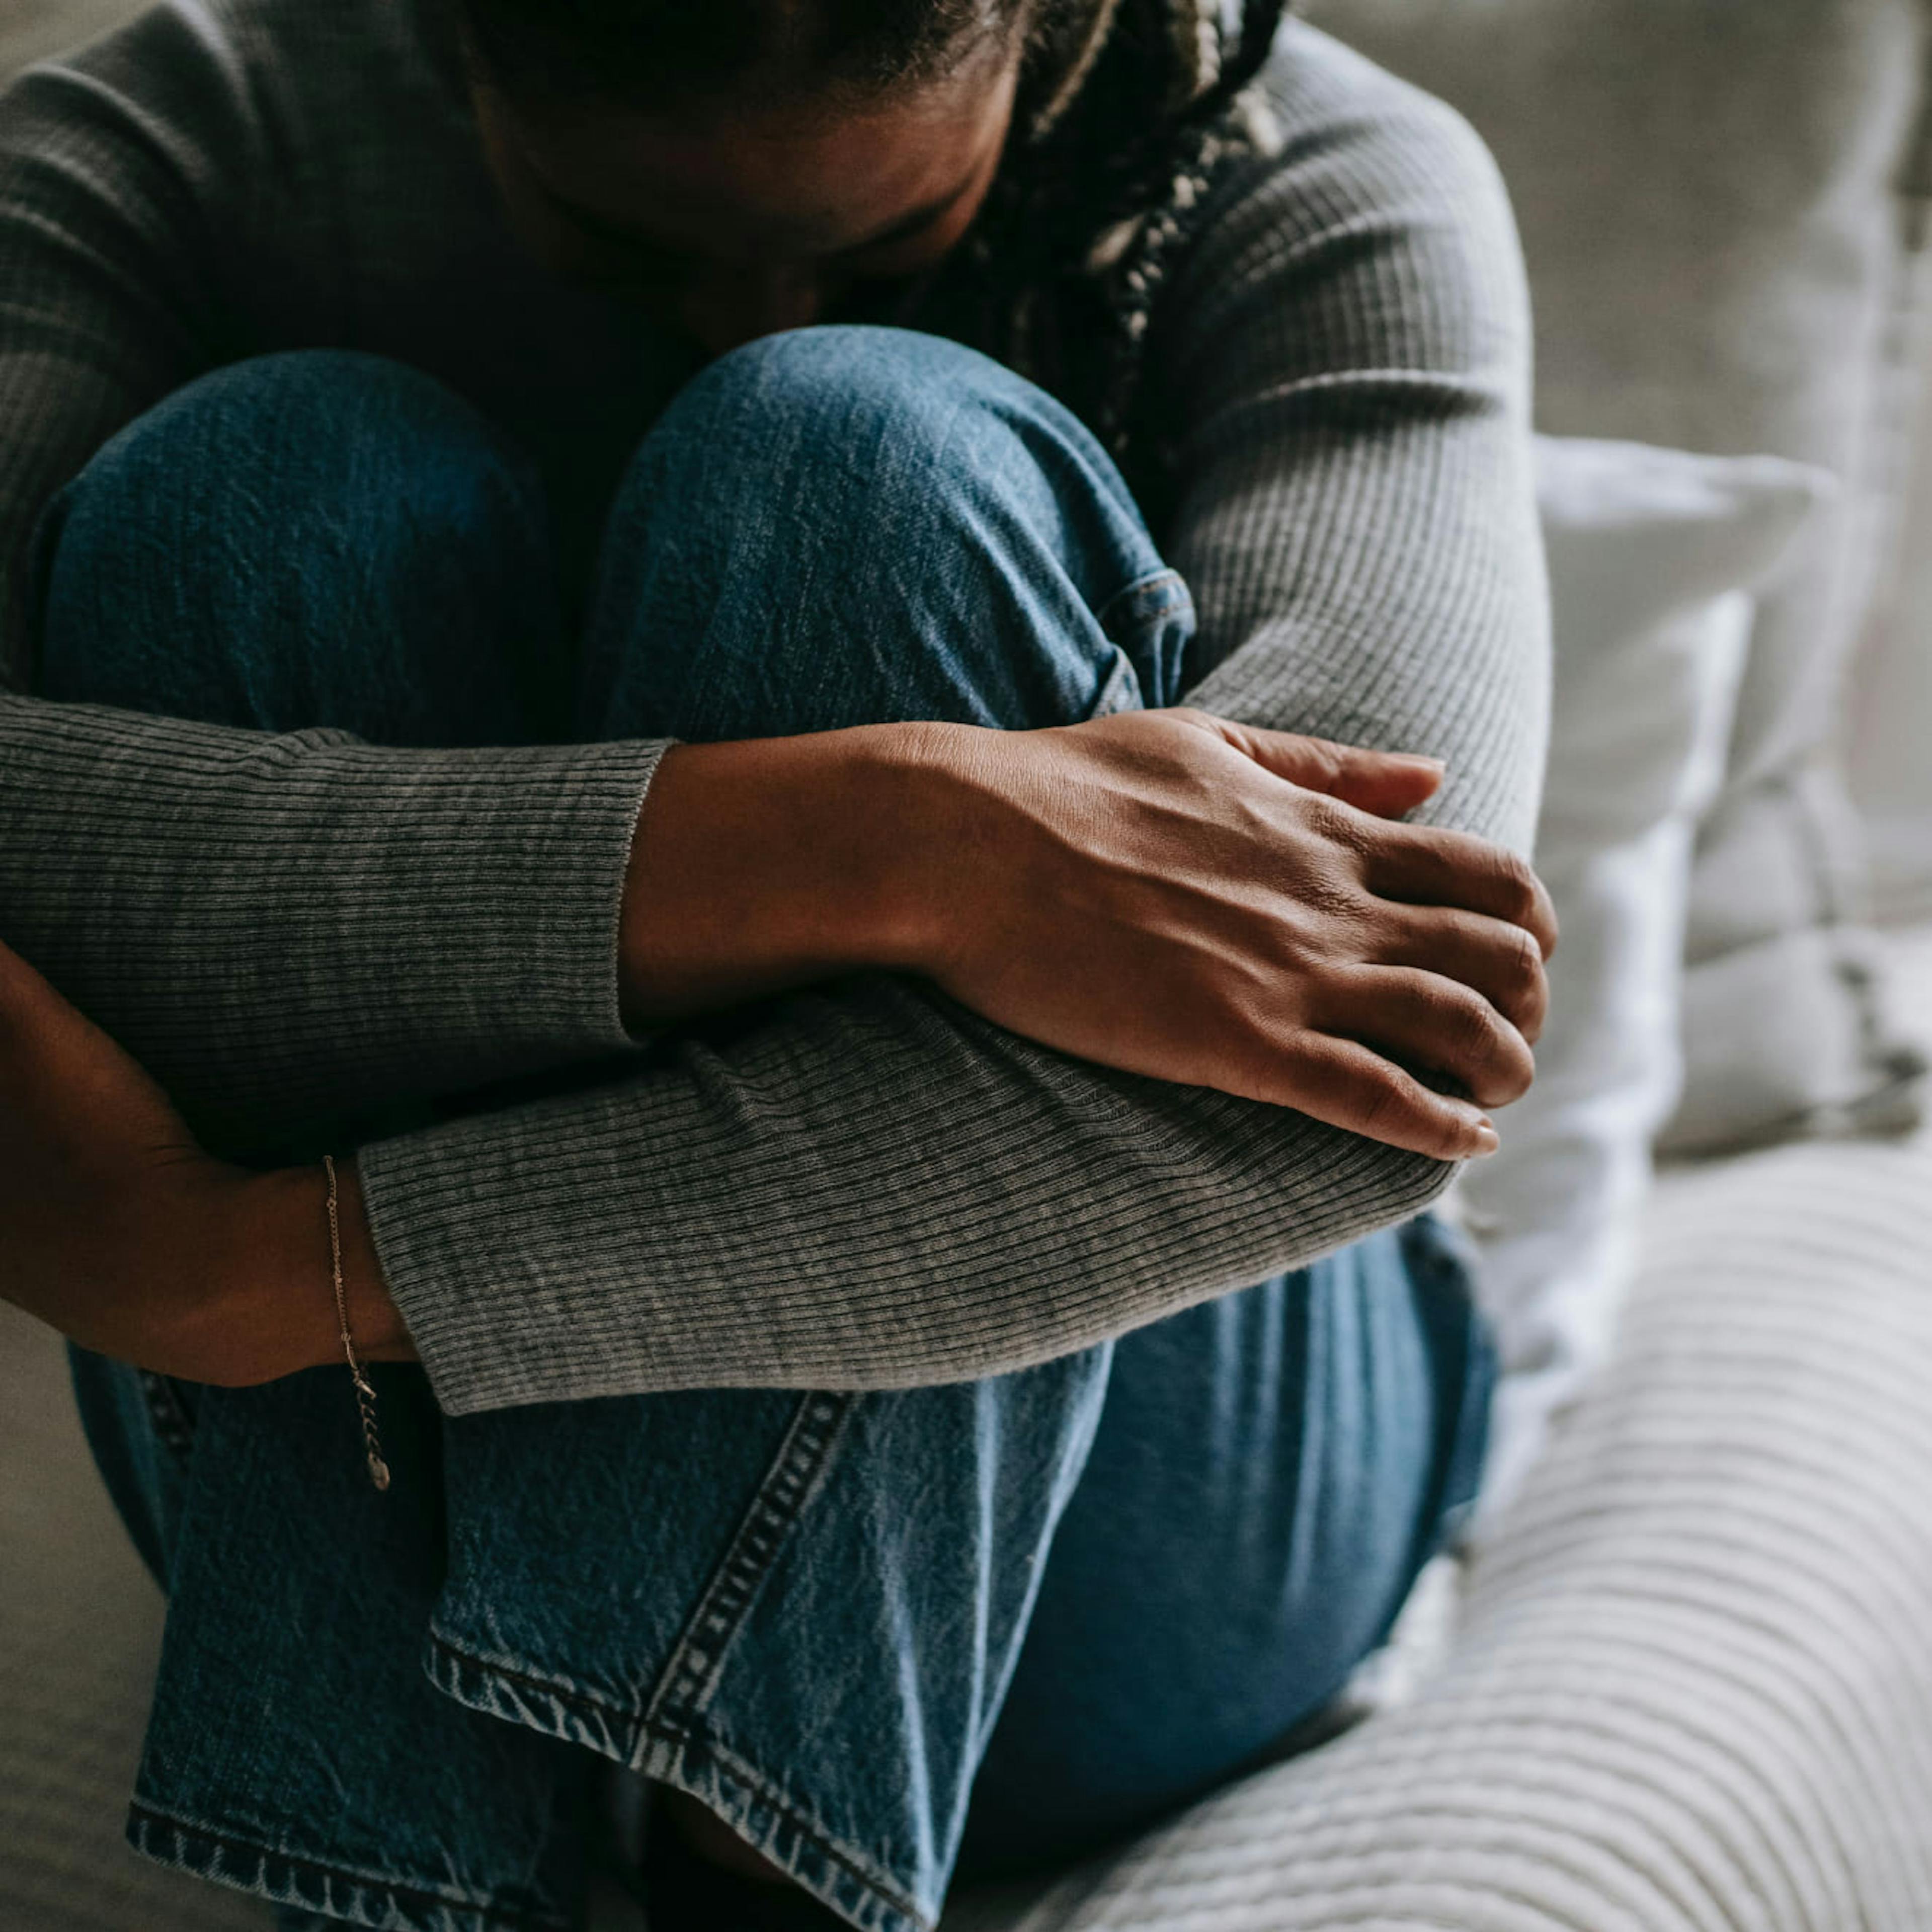 A Christian wife prays to God for guidance in the wake of experiencing sexual violence from her husband.